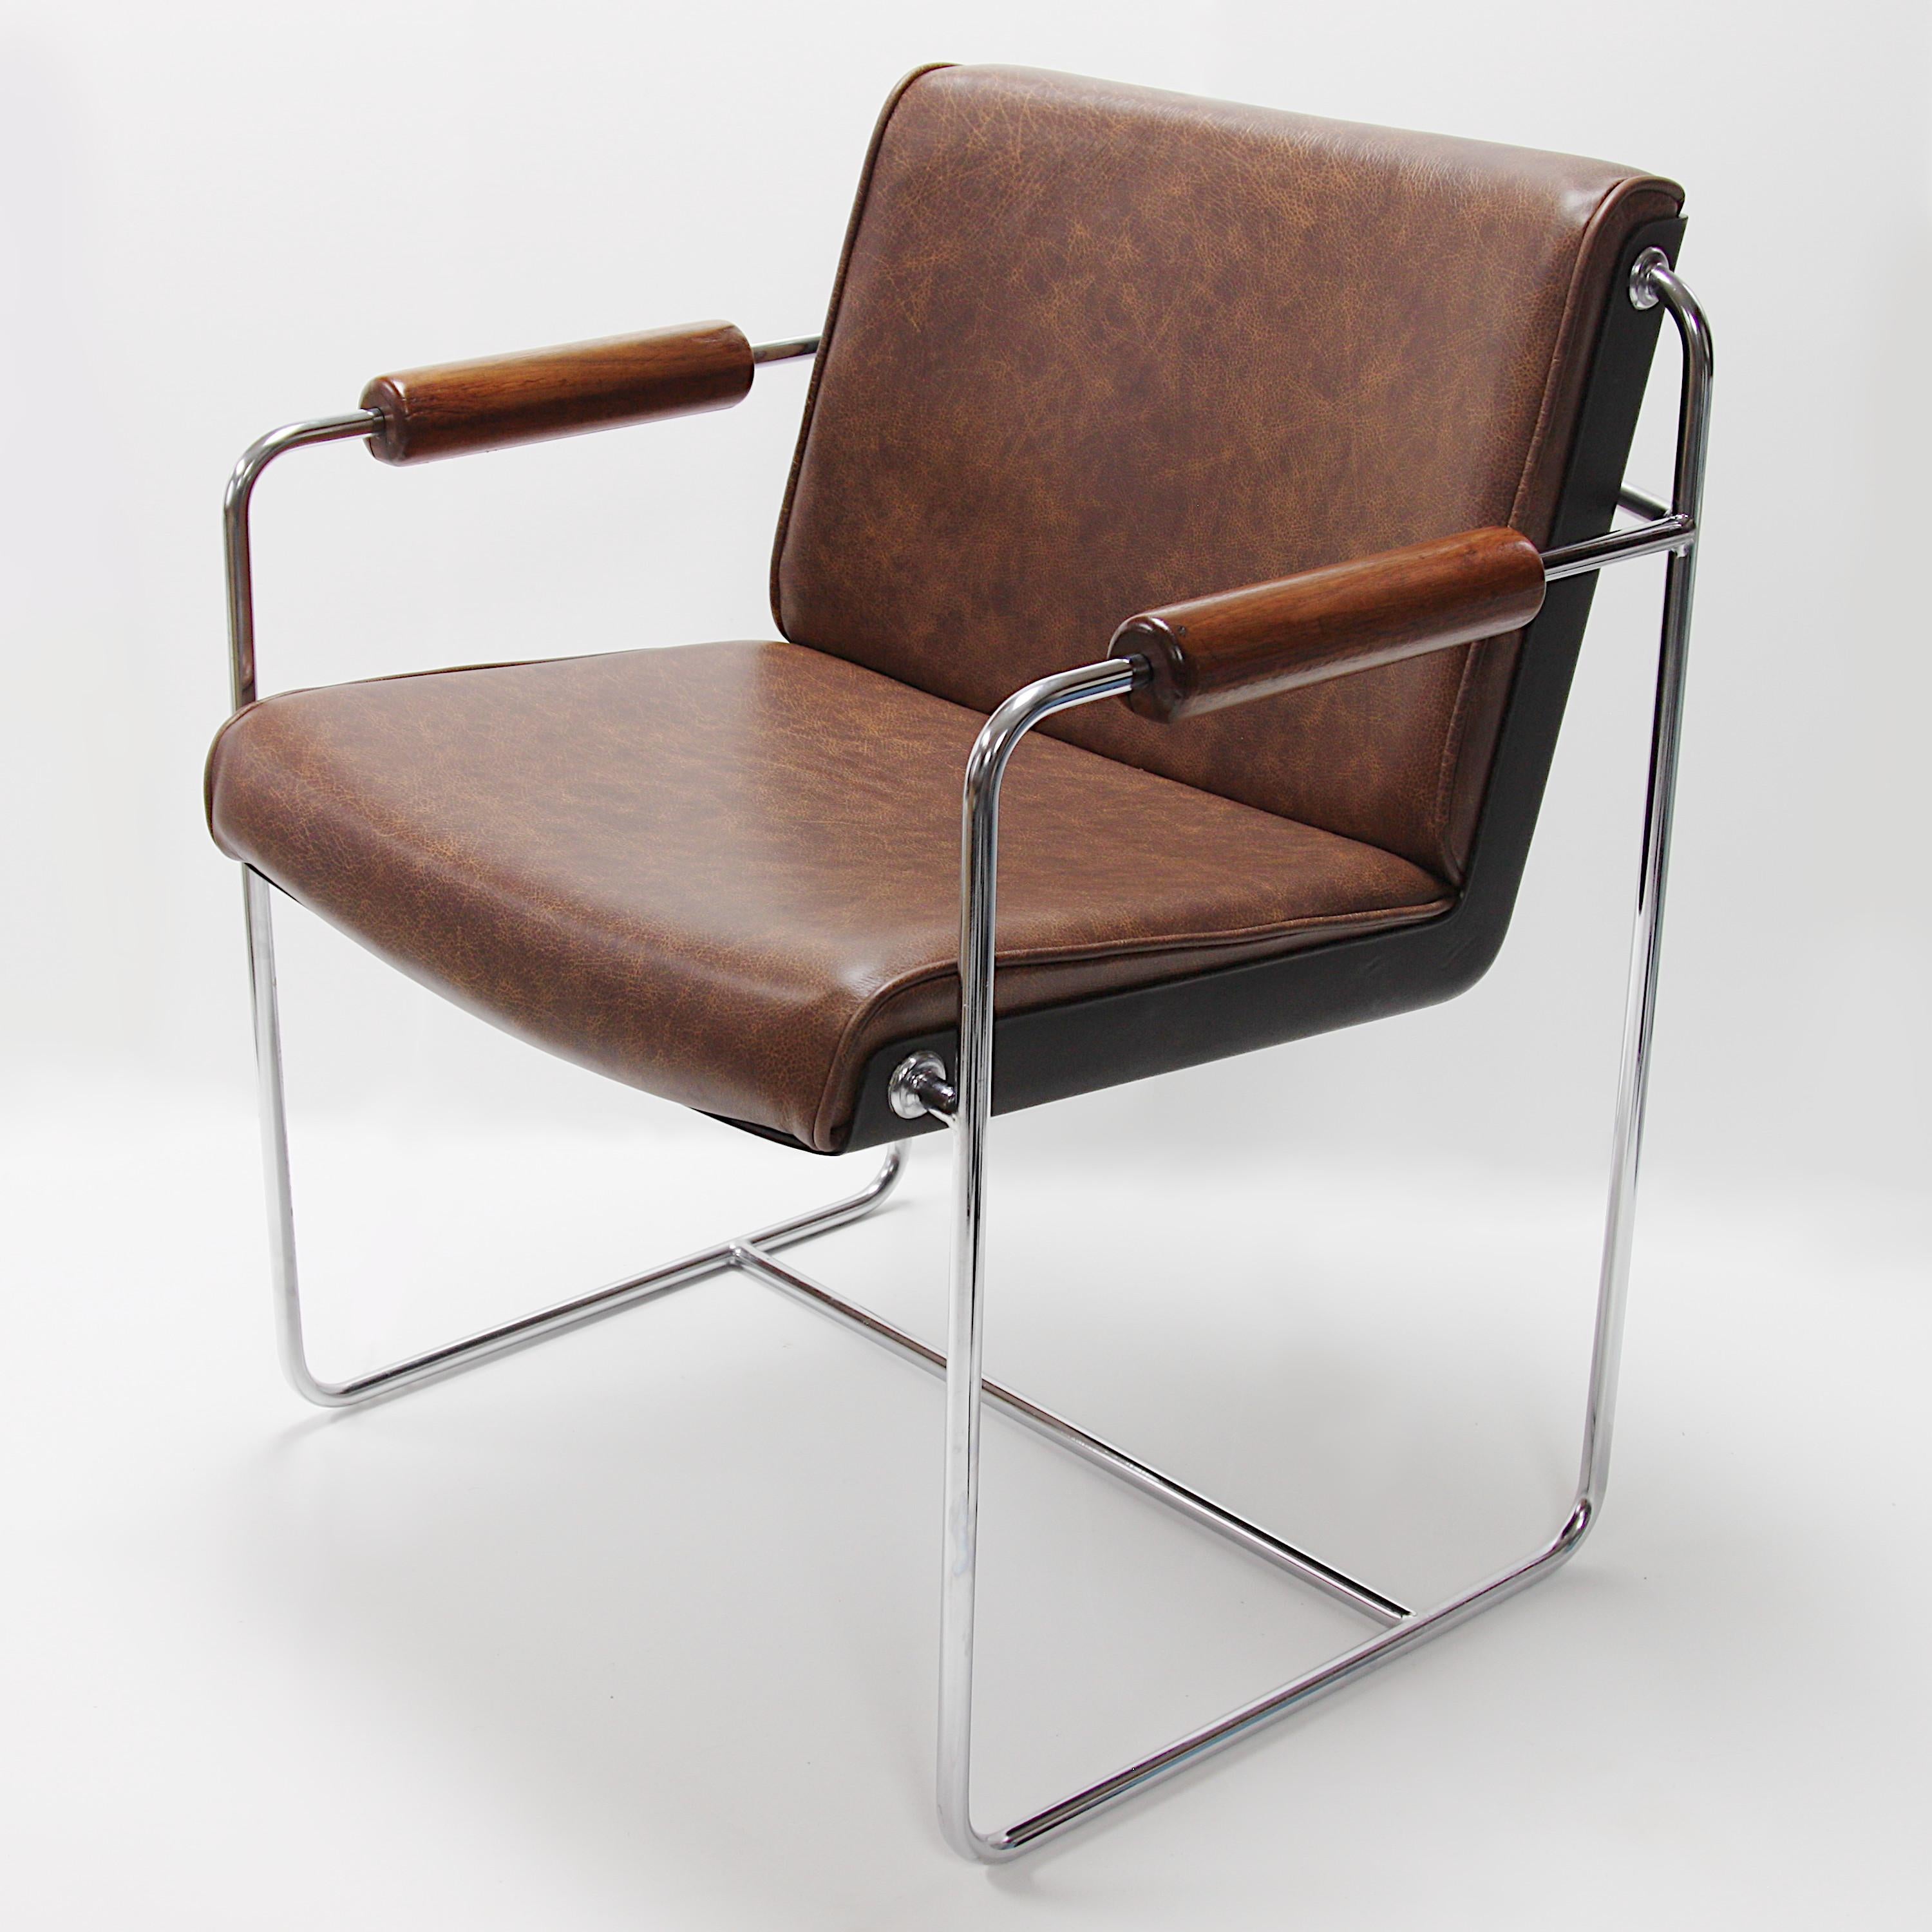 Rare Pair of Mid-Century Modern Fiberglass and Brown Leather Shell Lounge Chairs For Sale 3